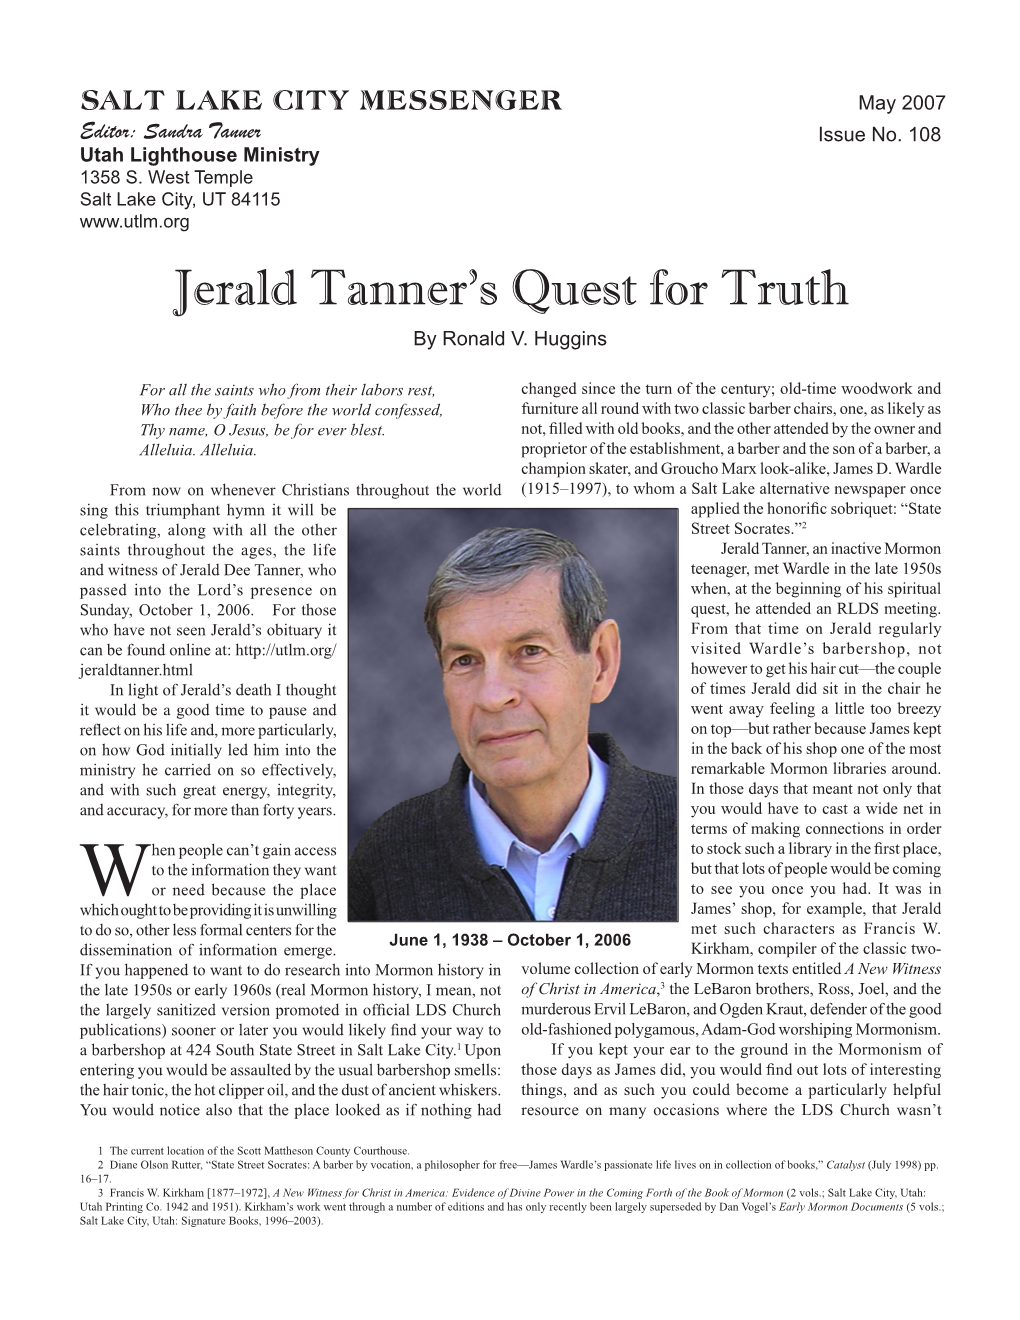 Jerald Tanner's Quest for Truth